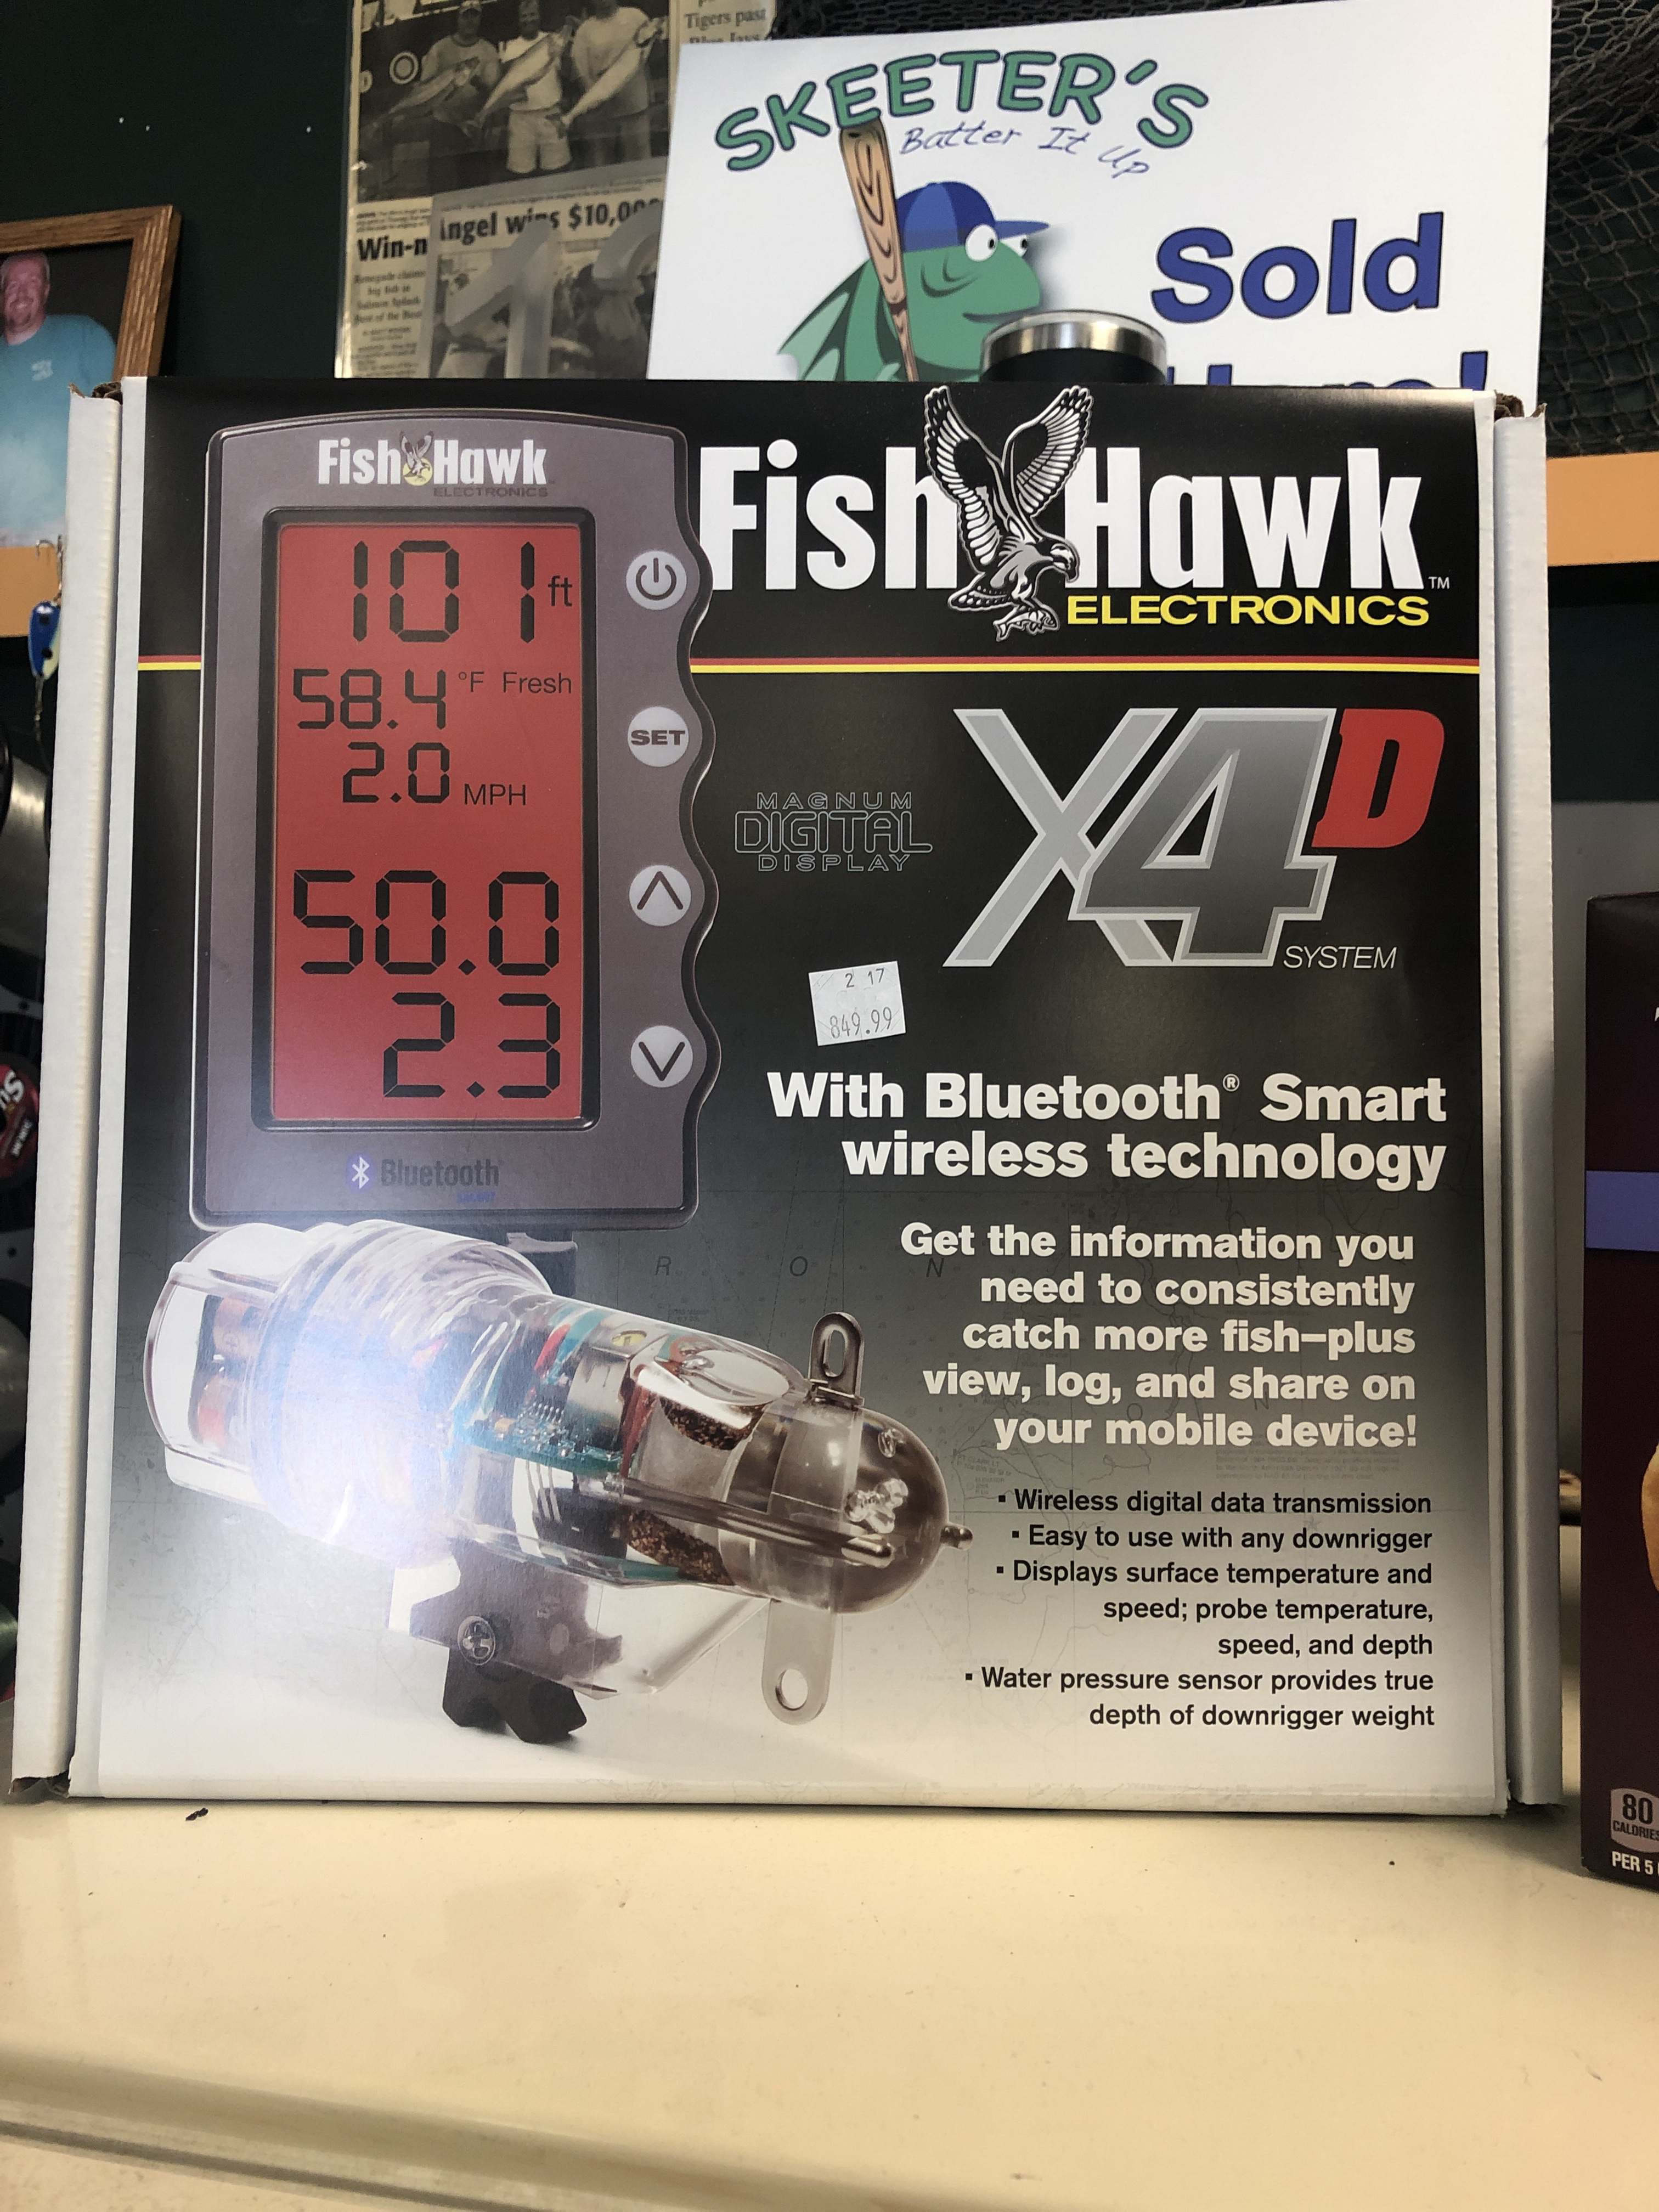 Fish Hawk Electronics - The Great Lakes Fishing Podcast is hitting